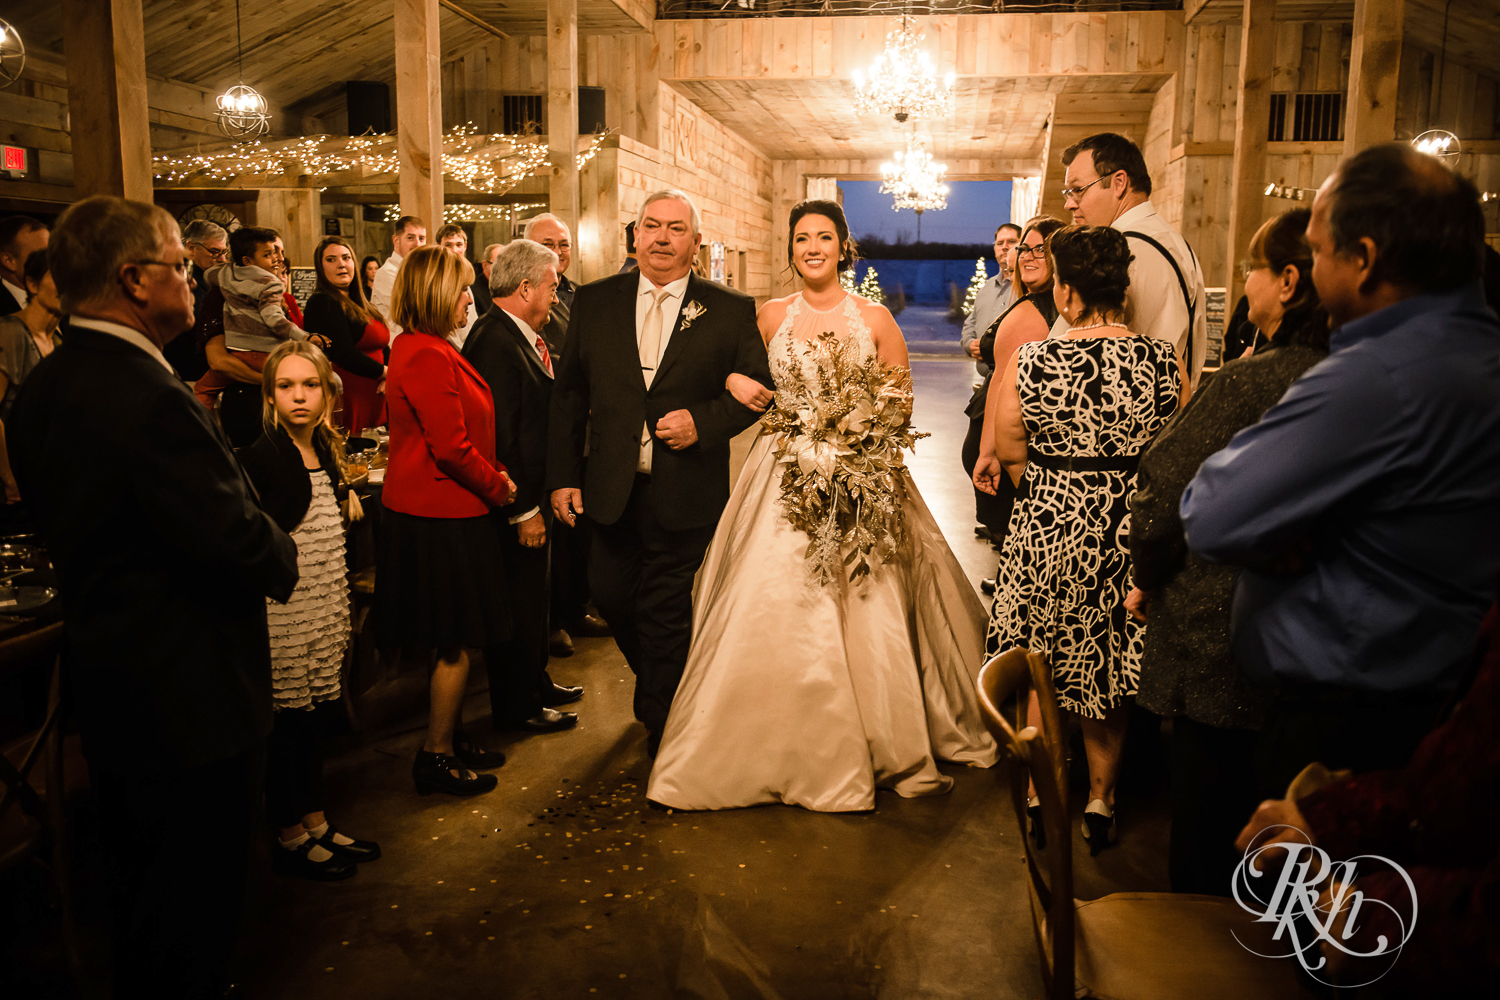 Bride walks down the aisle during new year's eve wedding ceremony at Creekside Farm in Rush City, Minnesota.